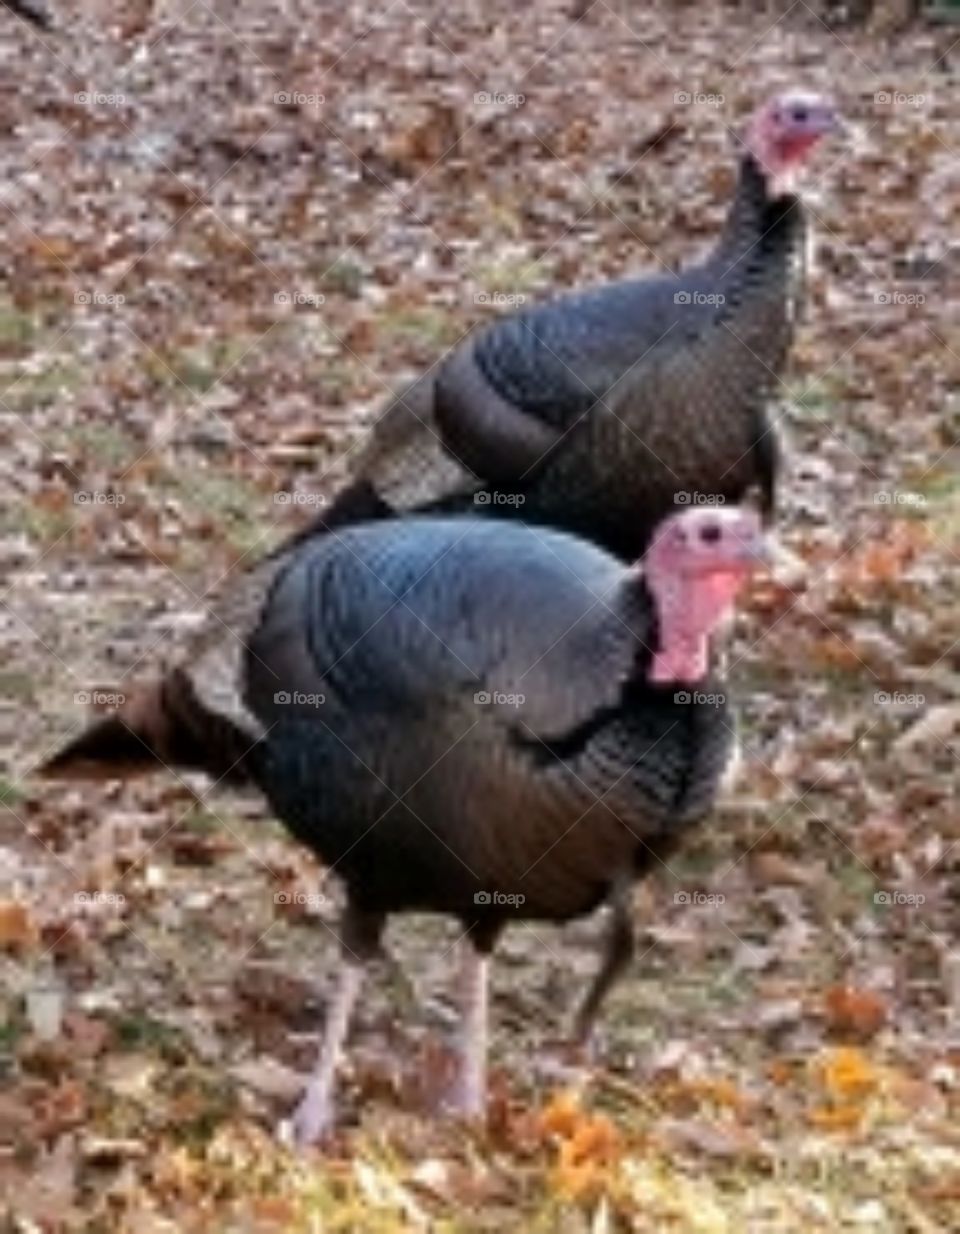 Wild turkeys on casual walkabout during a crisp Autumn afternoon on Cape Cod.